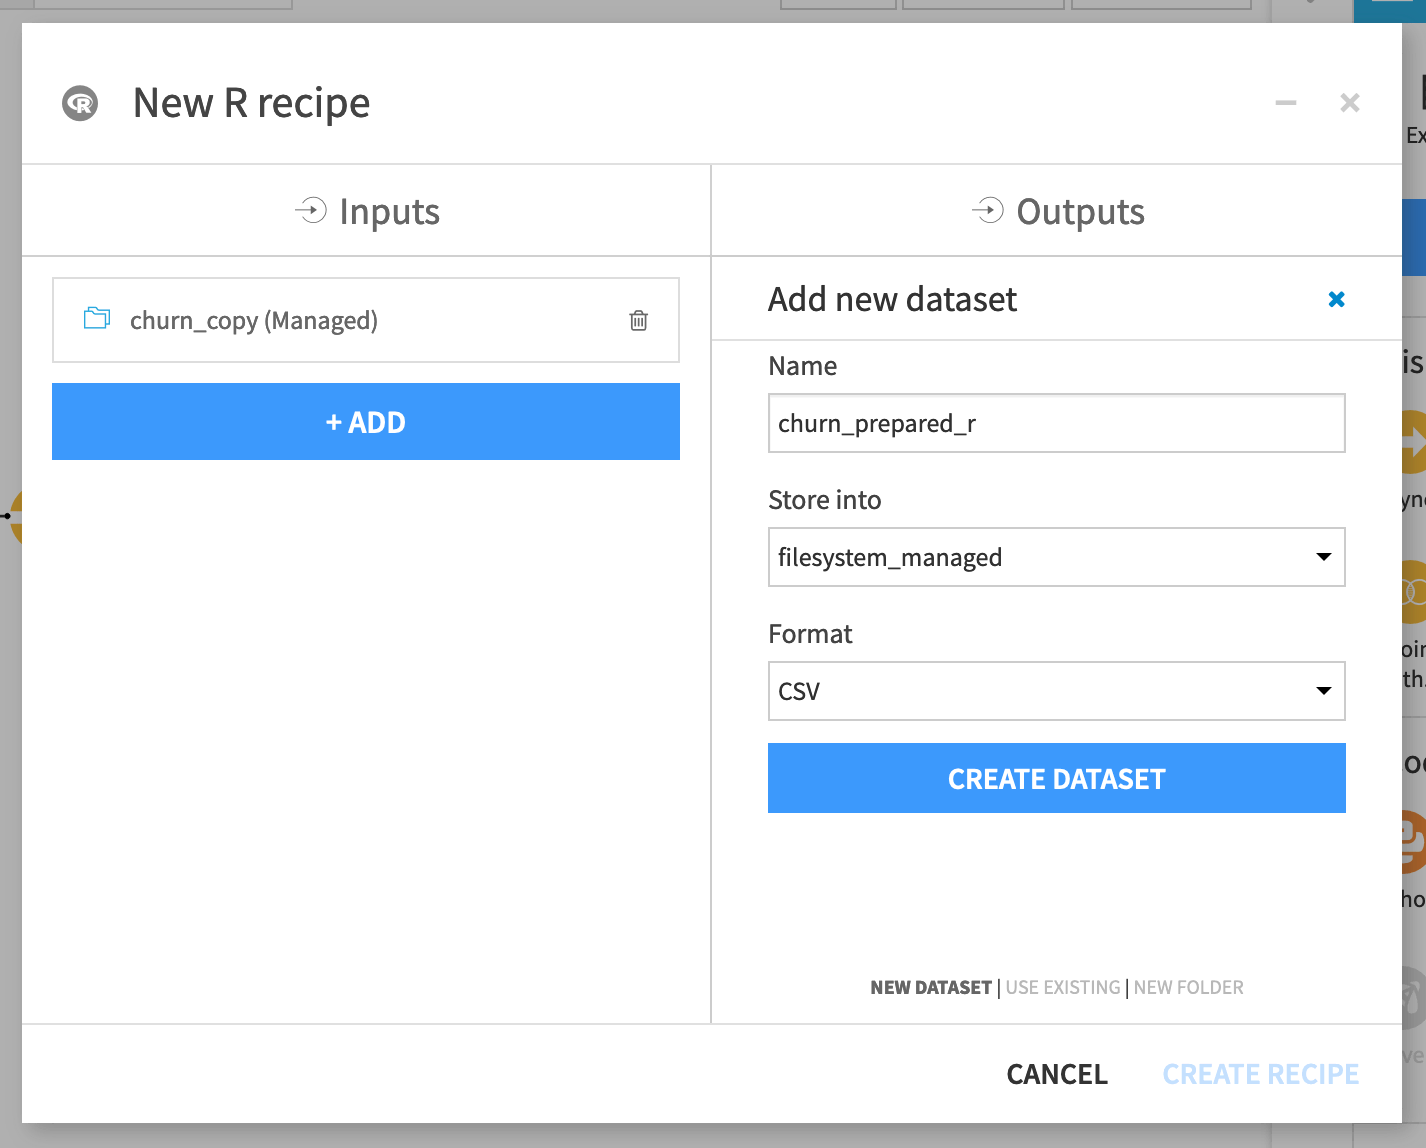 Dialog of new R recipe with churn_copy as input and churn_prepared_r as output dataset